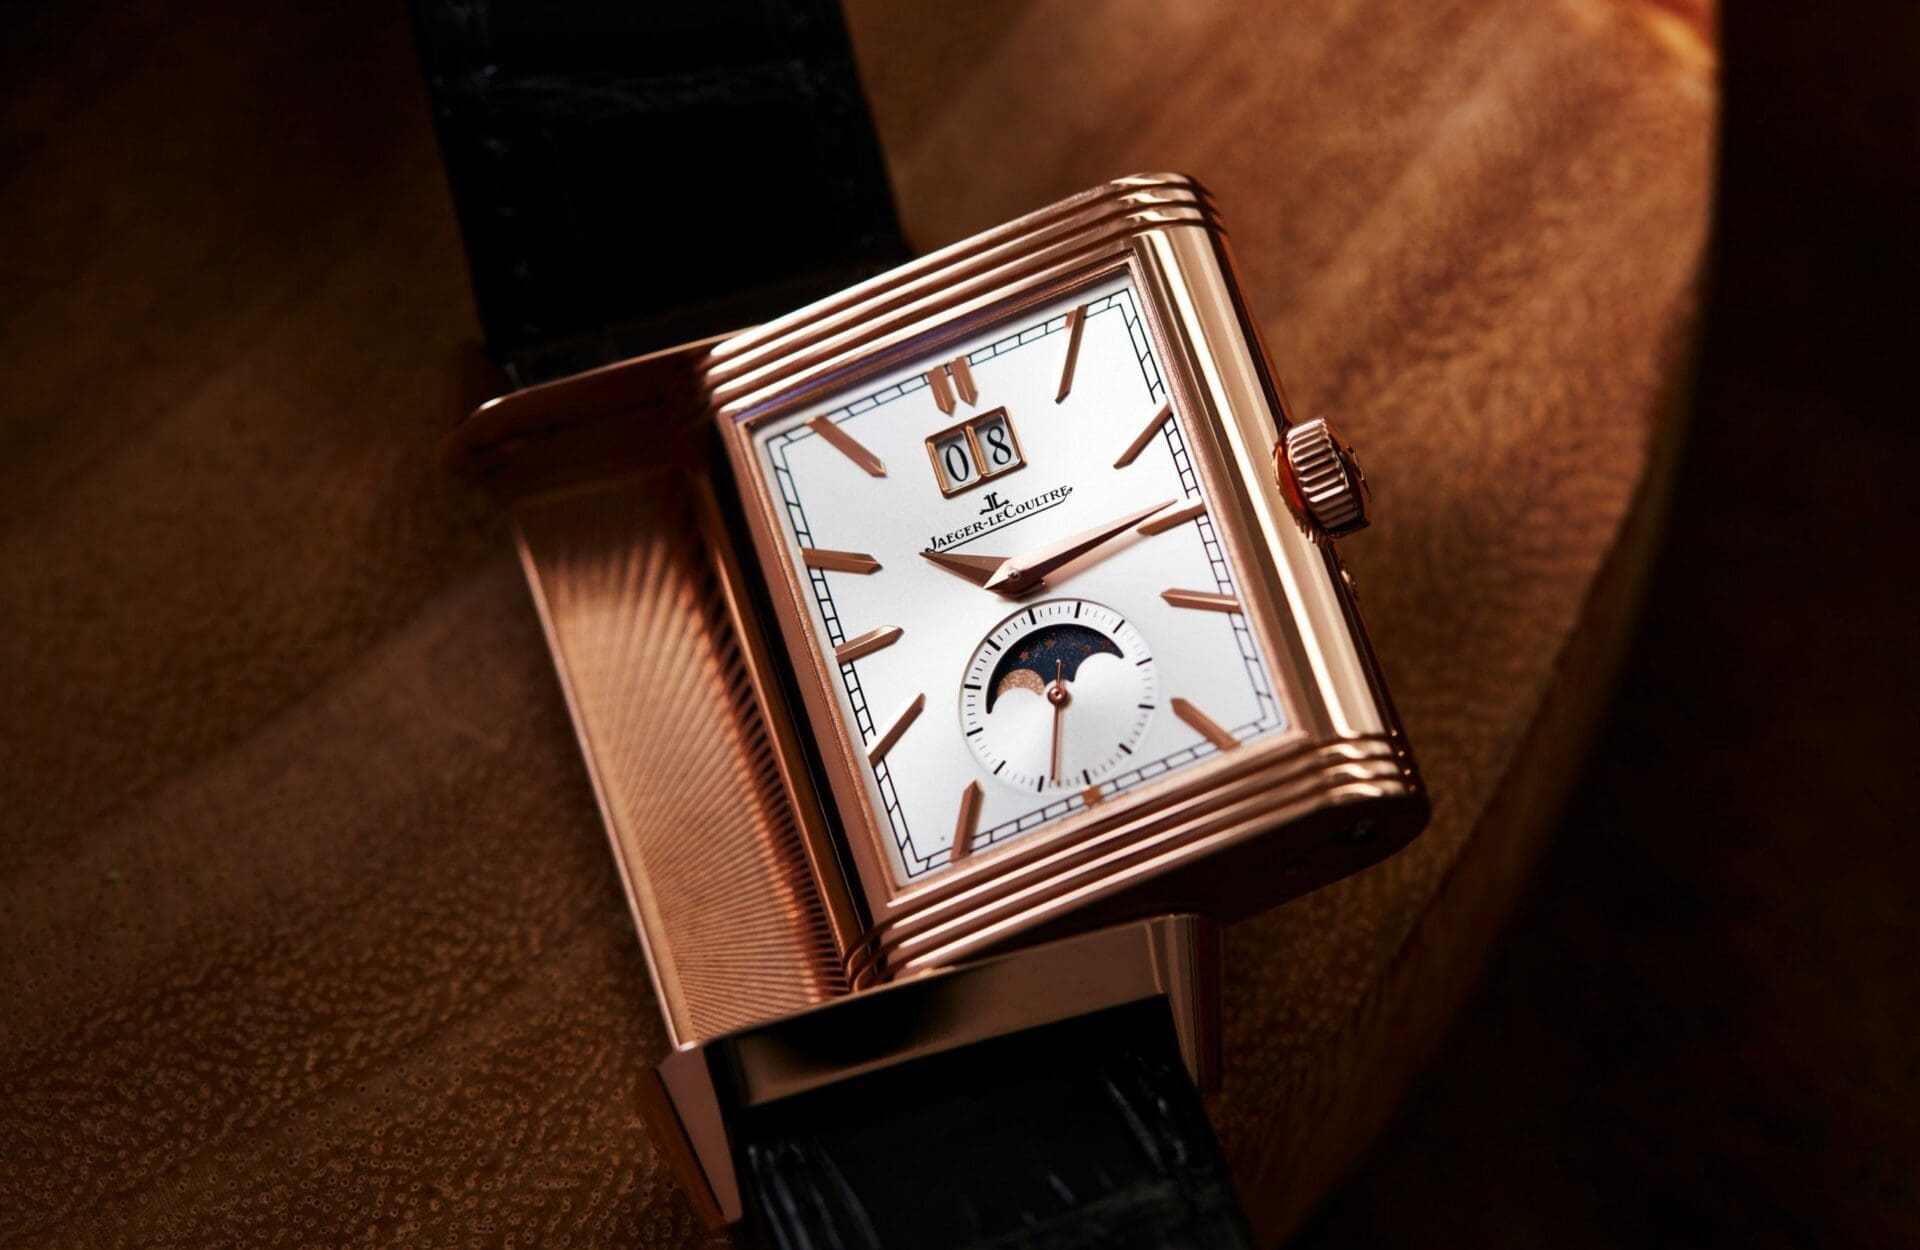 HANDS-ON: The Jaeger-LeCoultre Reverso Tribute Nonantième is a fitting birthday celebration of a truly classic watch